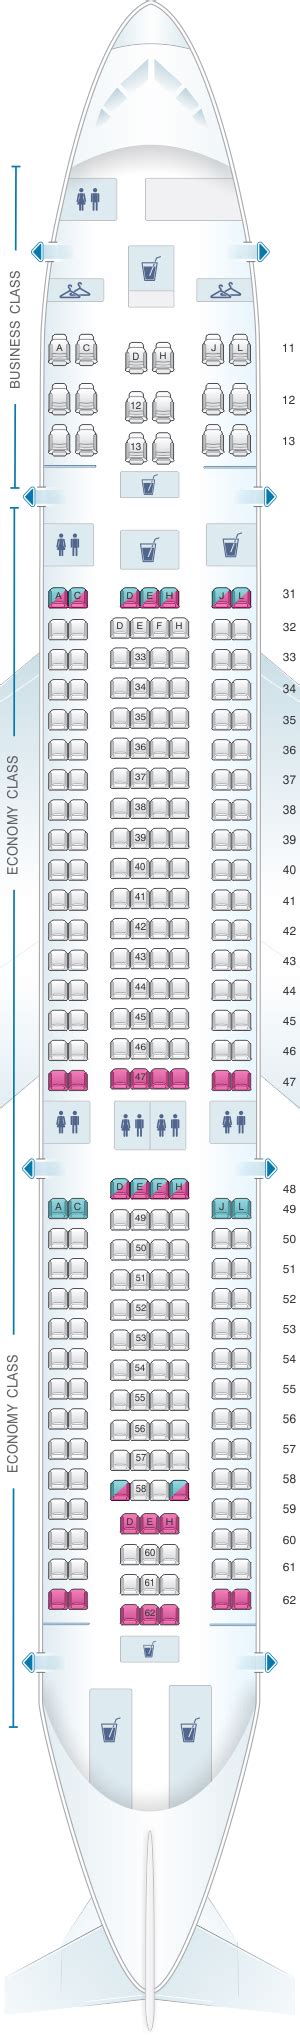 Airbus Industrie A330 200 Seat Map China Southern Cabinets Matttroy